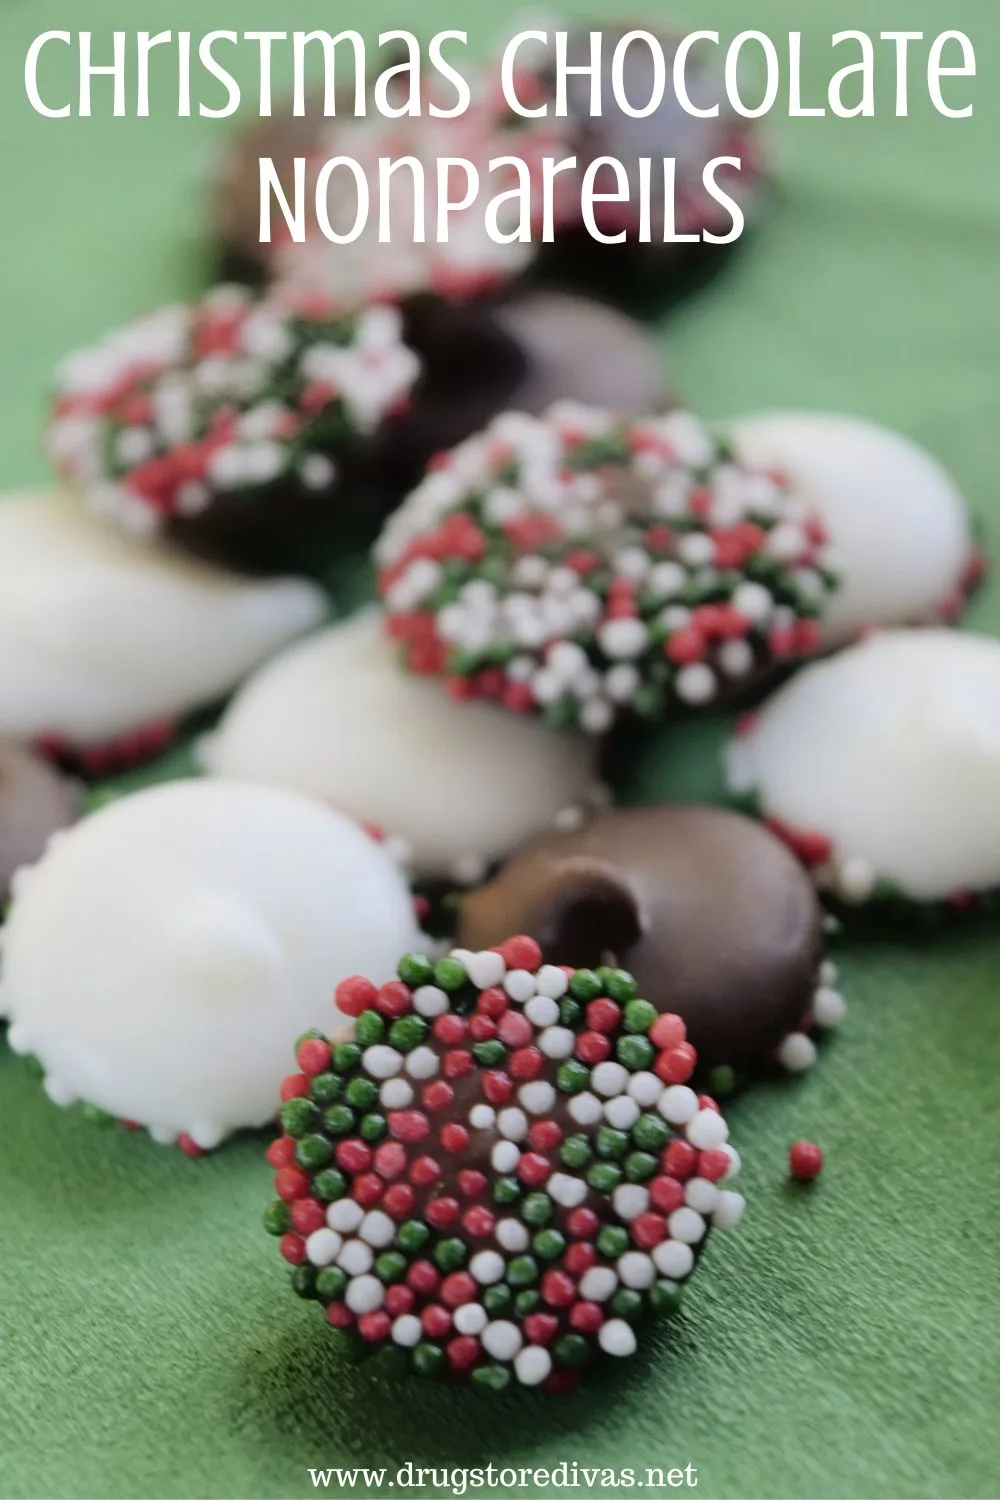 White and milk chocolate candies with red, white, and green sprinkles on the bottom on a green napkin and the words 